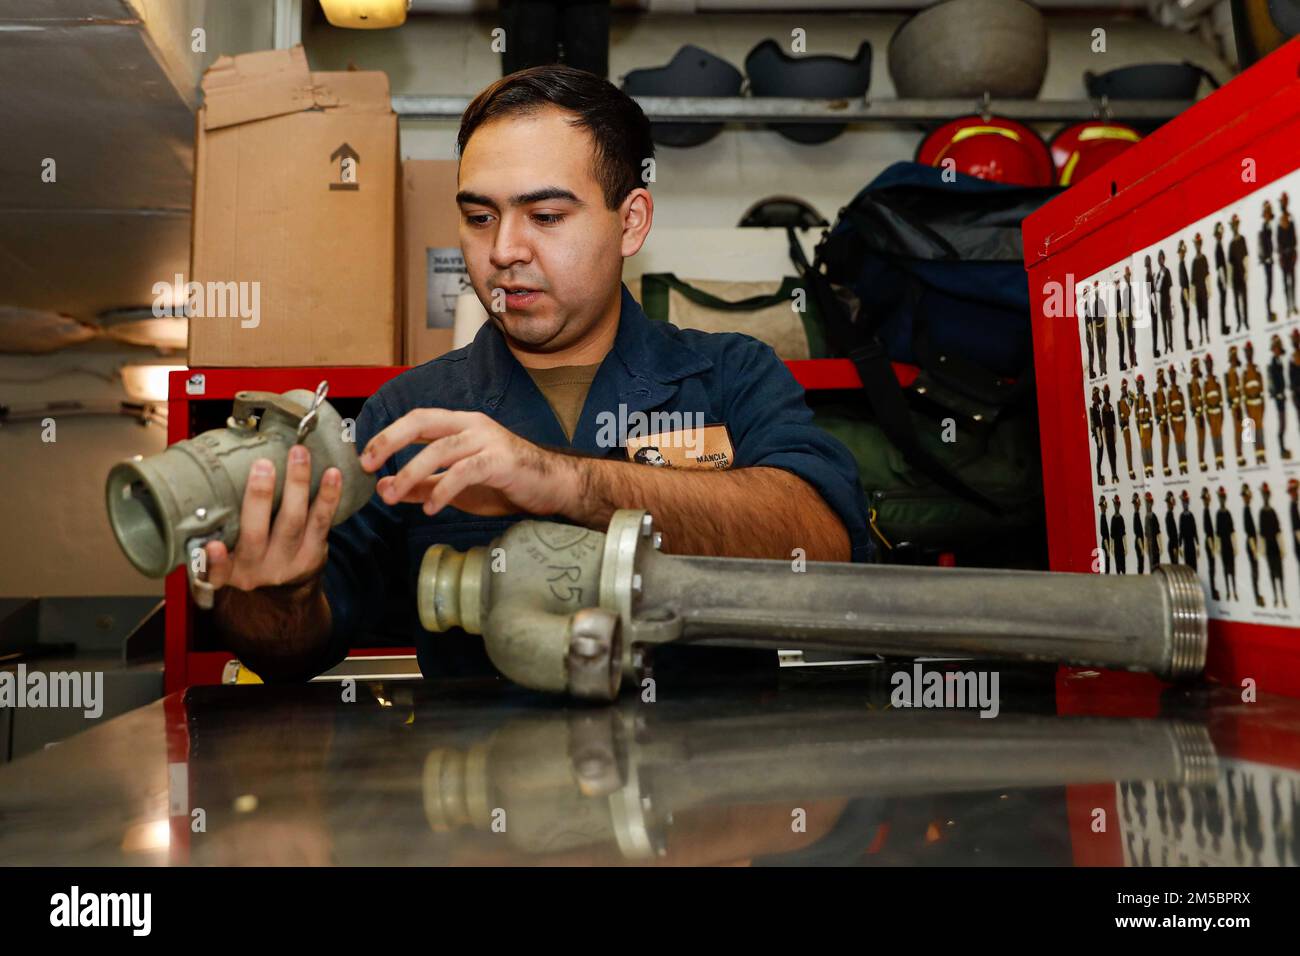 PHILIPPINE SEA (Feb. 24, 2022) Damage Controlman Fireman John Mancia, from Dallas, takes inventory of dewatering equipment in a repair locker aboard the Nimitz-class aircraft carrier USS Abraham Lincoln (CVN 72). Abraham Lincoln Strike Group is on a scheduled deployment in the U.S. 7th Fleet area of operations to enhance interoperability through alliances and partnerships while serving as a ready-response force in support of a free and open Indo-Pacific region. Stock Photo